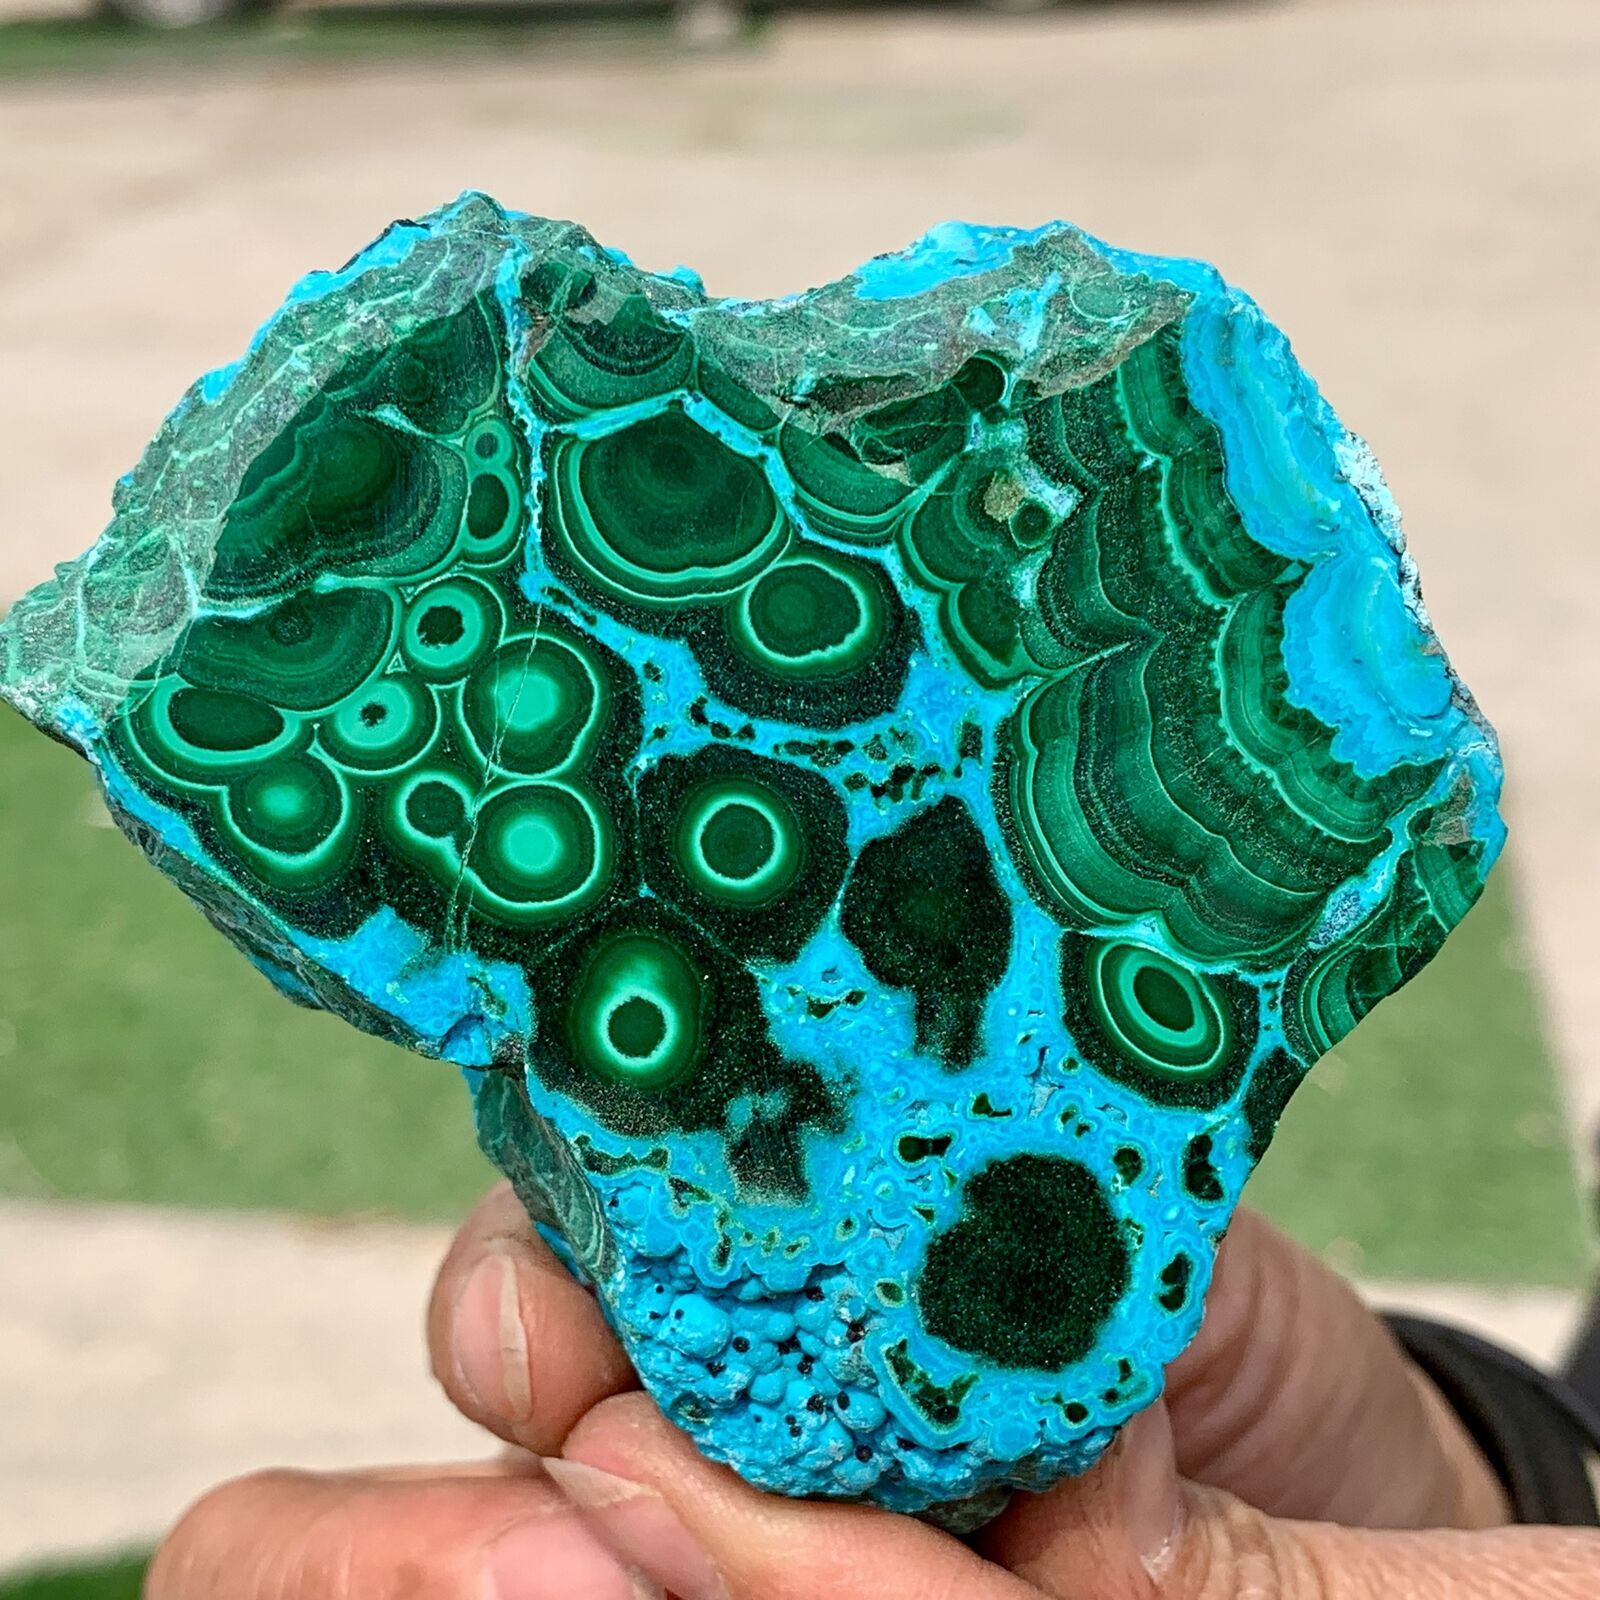 250G Natural Chrysocolla/Malachite transparent cluster rough mineral sample